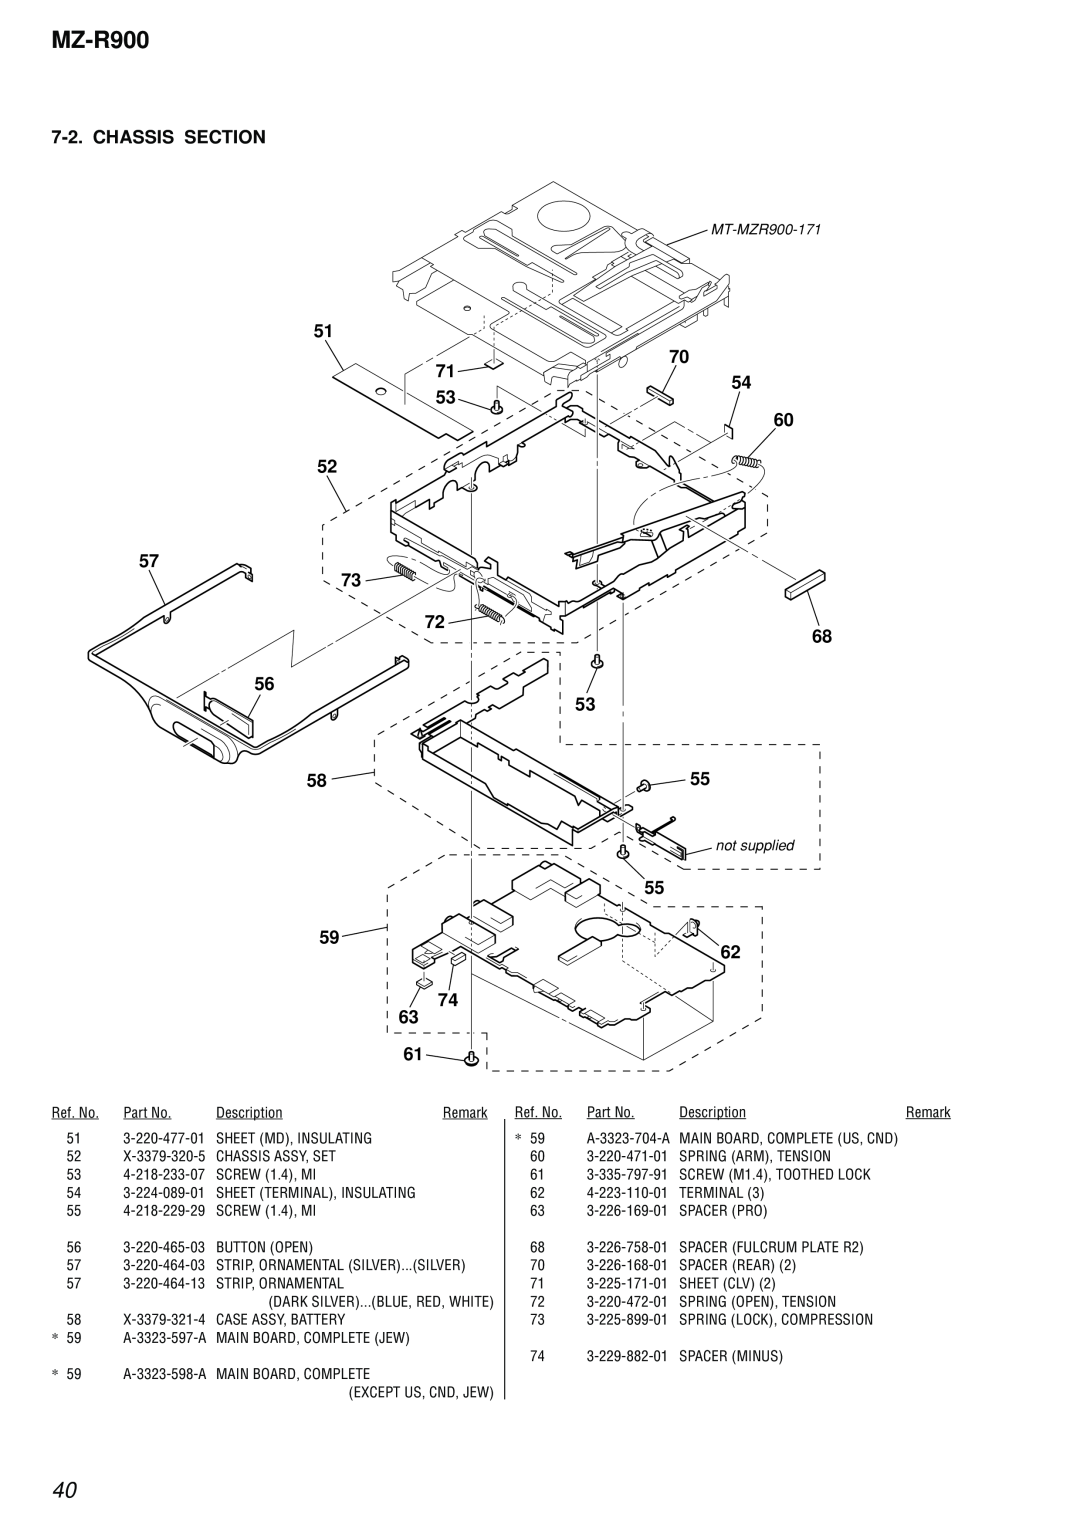 Sony MZ-R900 service manual Chassis Section 